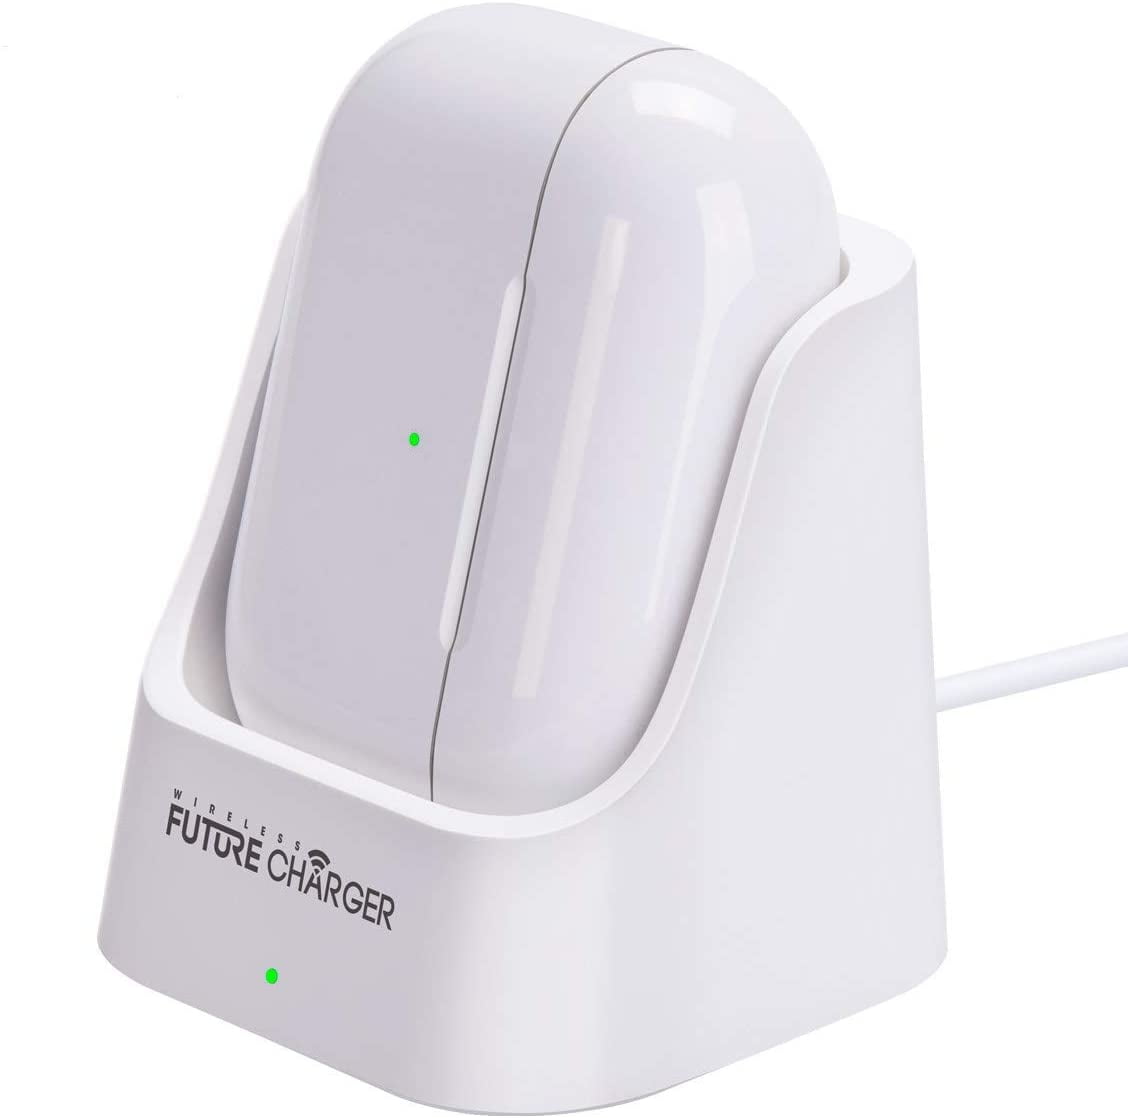 Airpod Charger, Wireless Charging Station Designed for Airpods 3rd/2nd and Airpods Pro, Compatible - Walmart.com